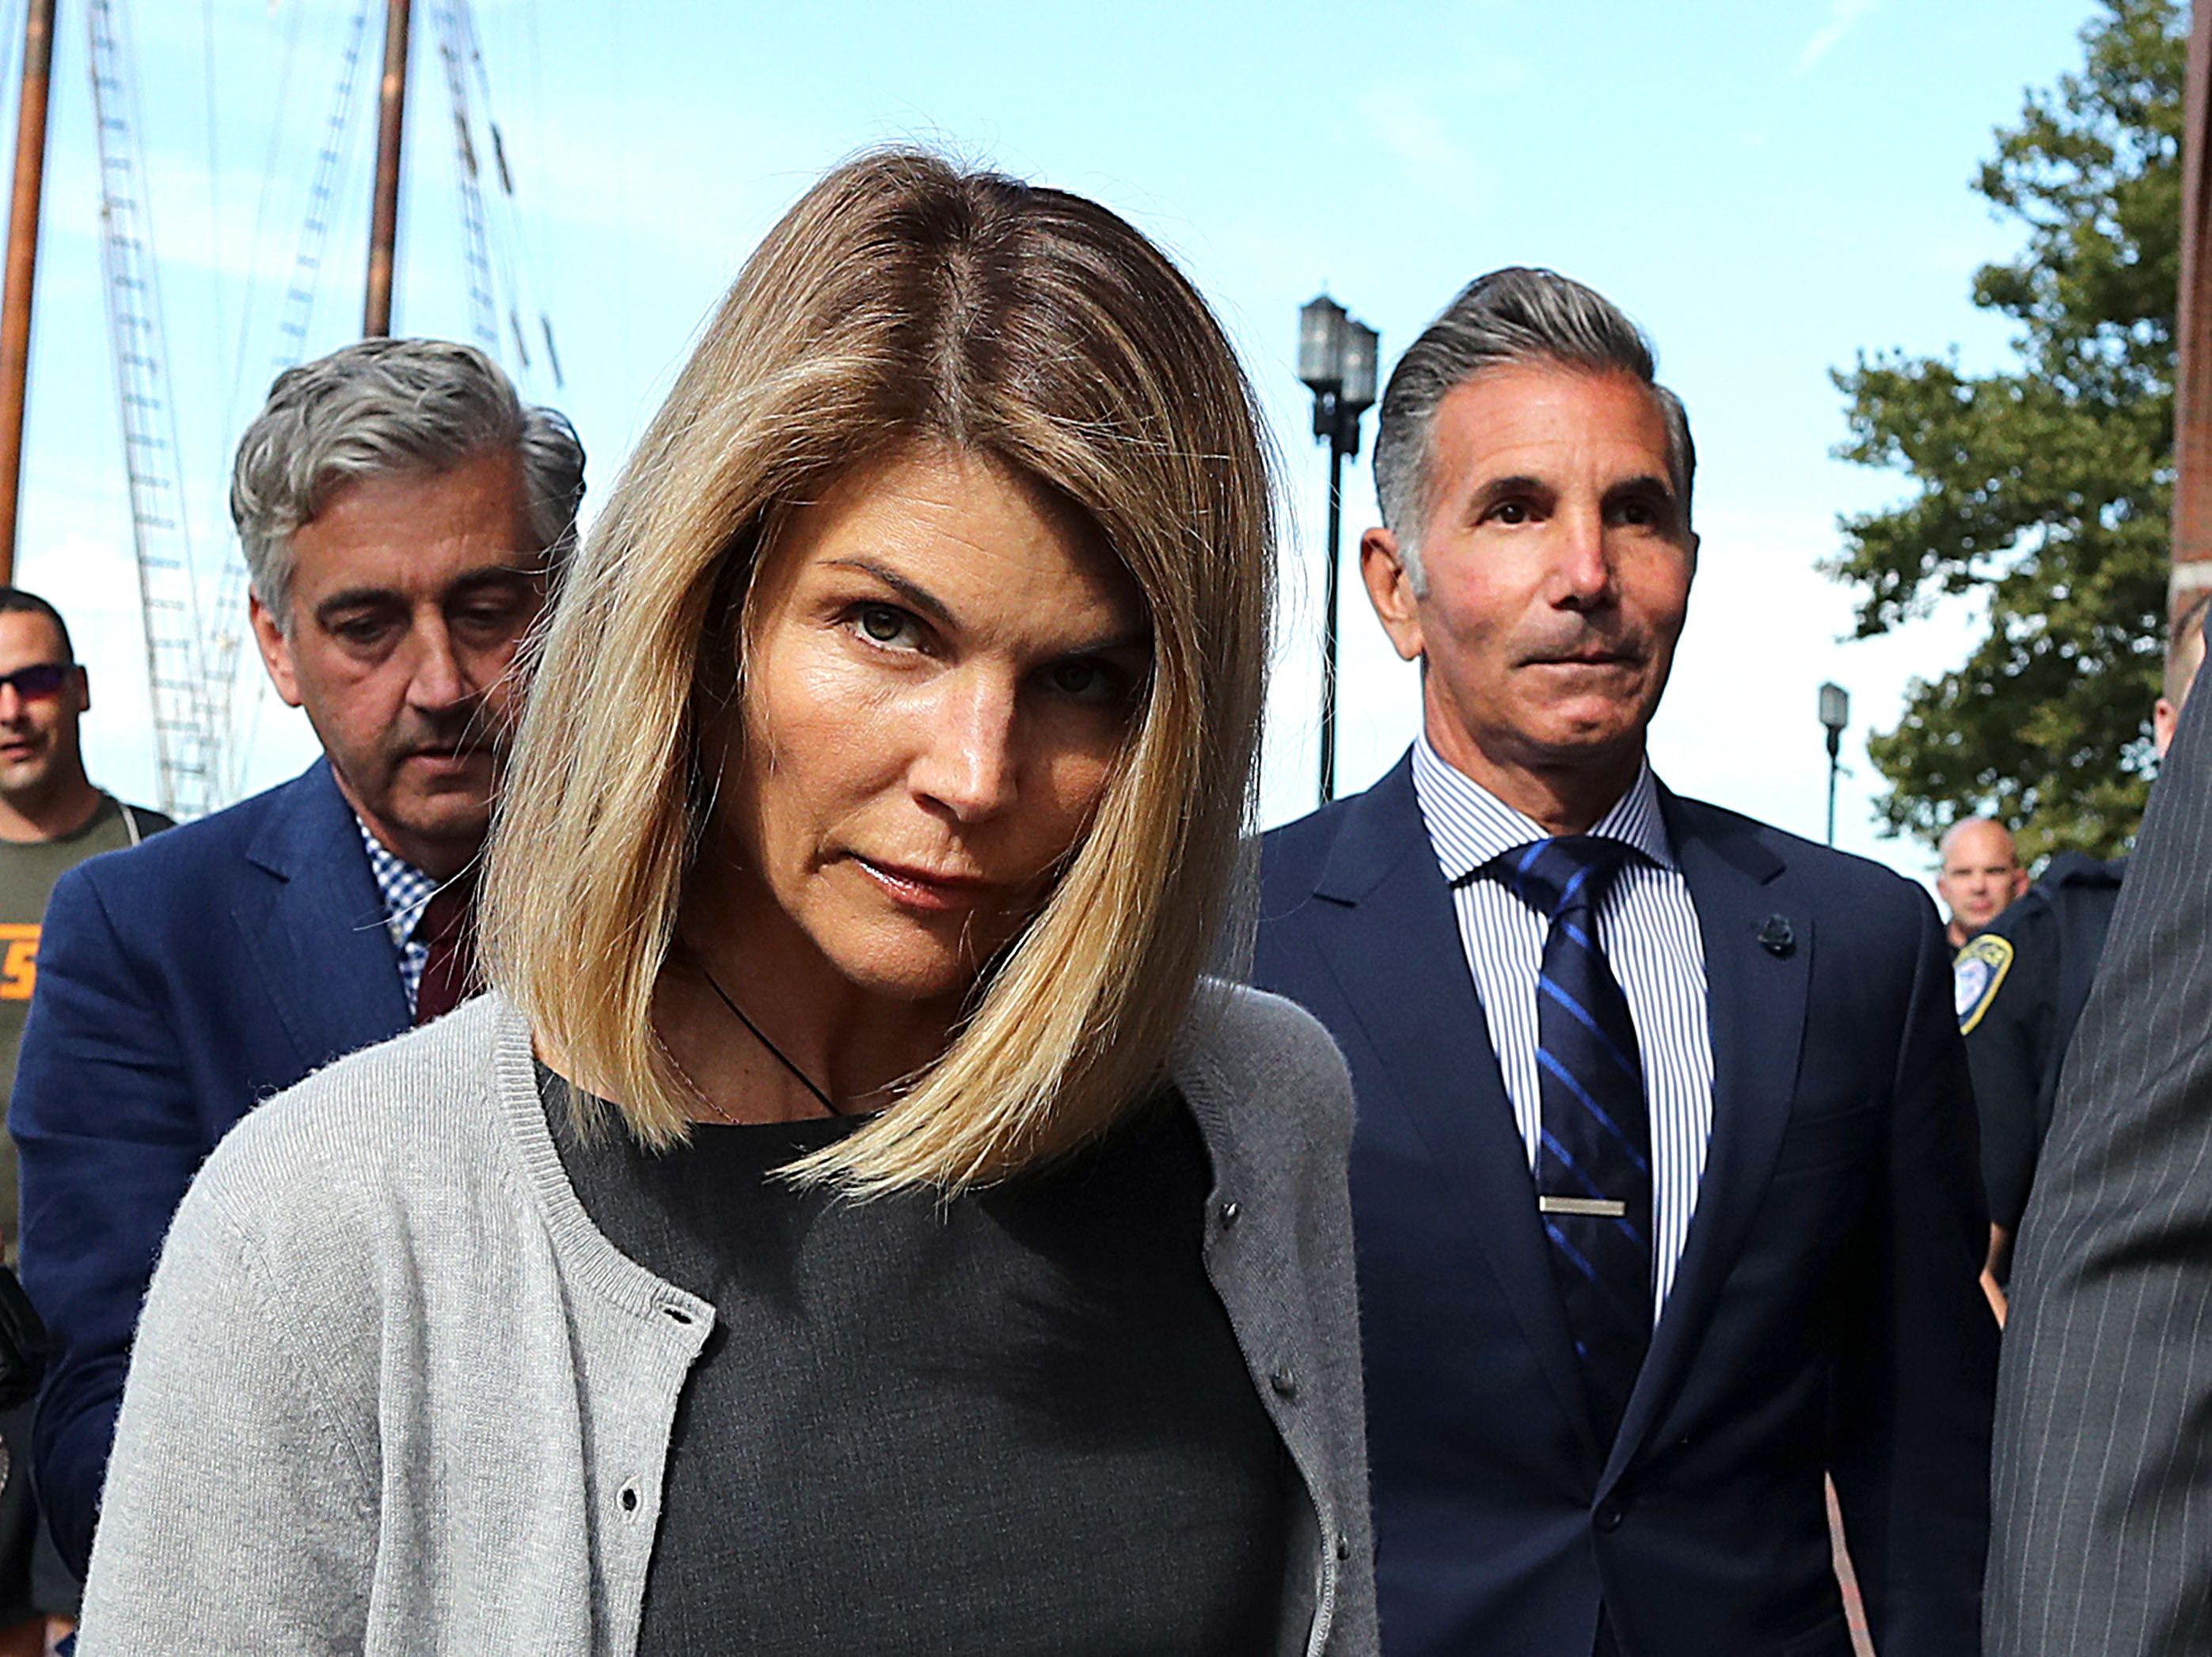 Lori Loughlin and Mossimo Giannulli as they left the John Joseph Moakley on August 27, 2019 | Photo: Getty Images